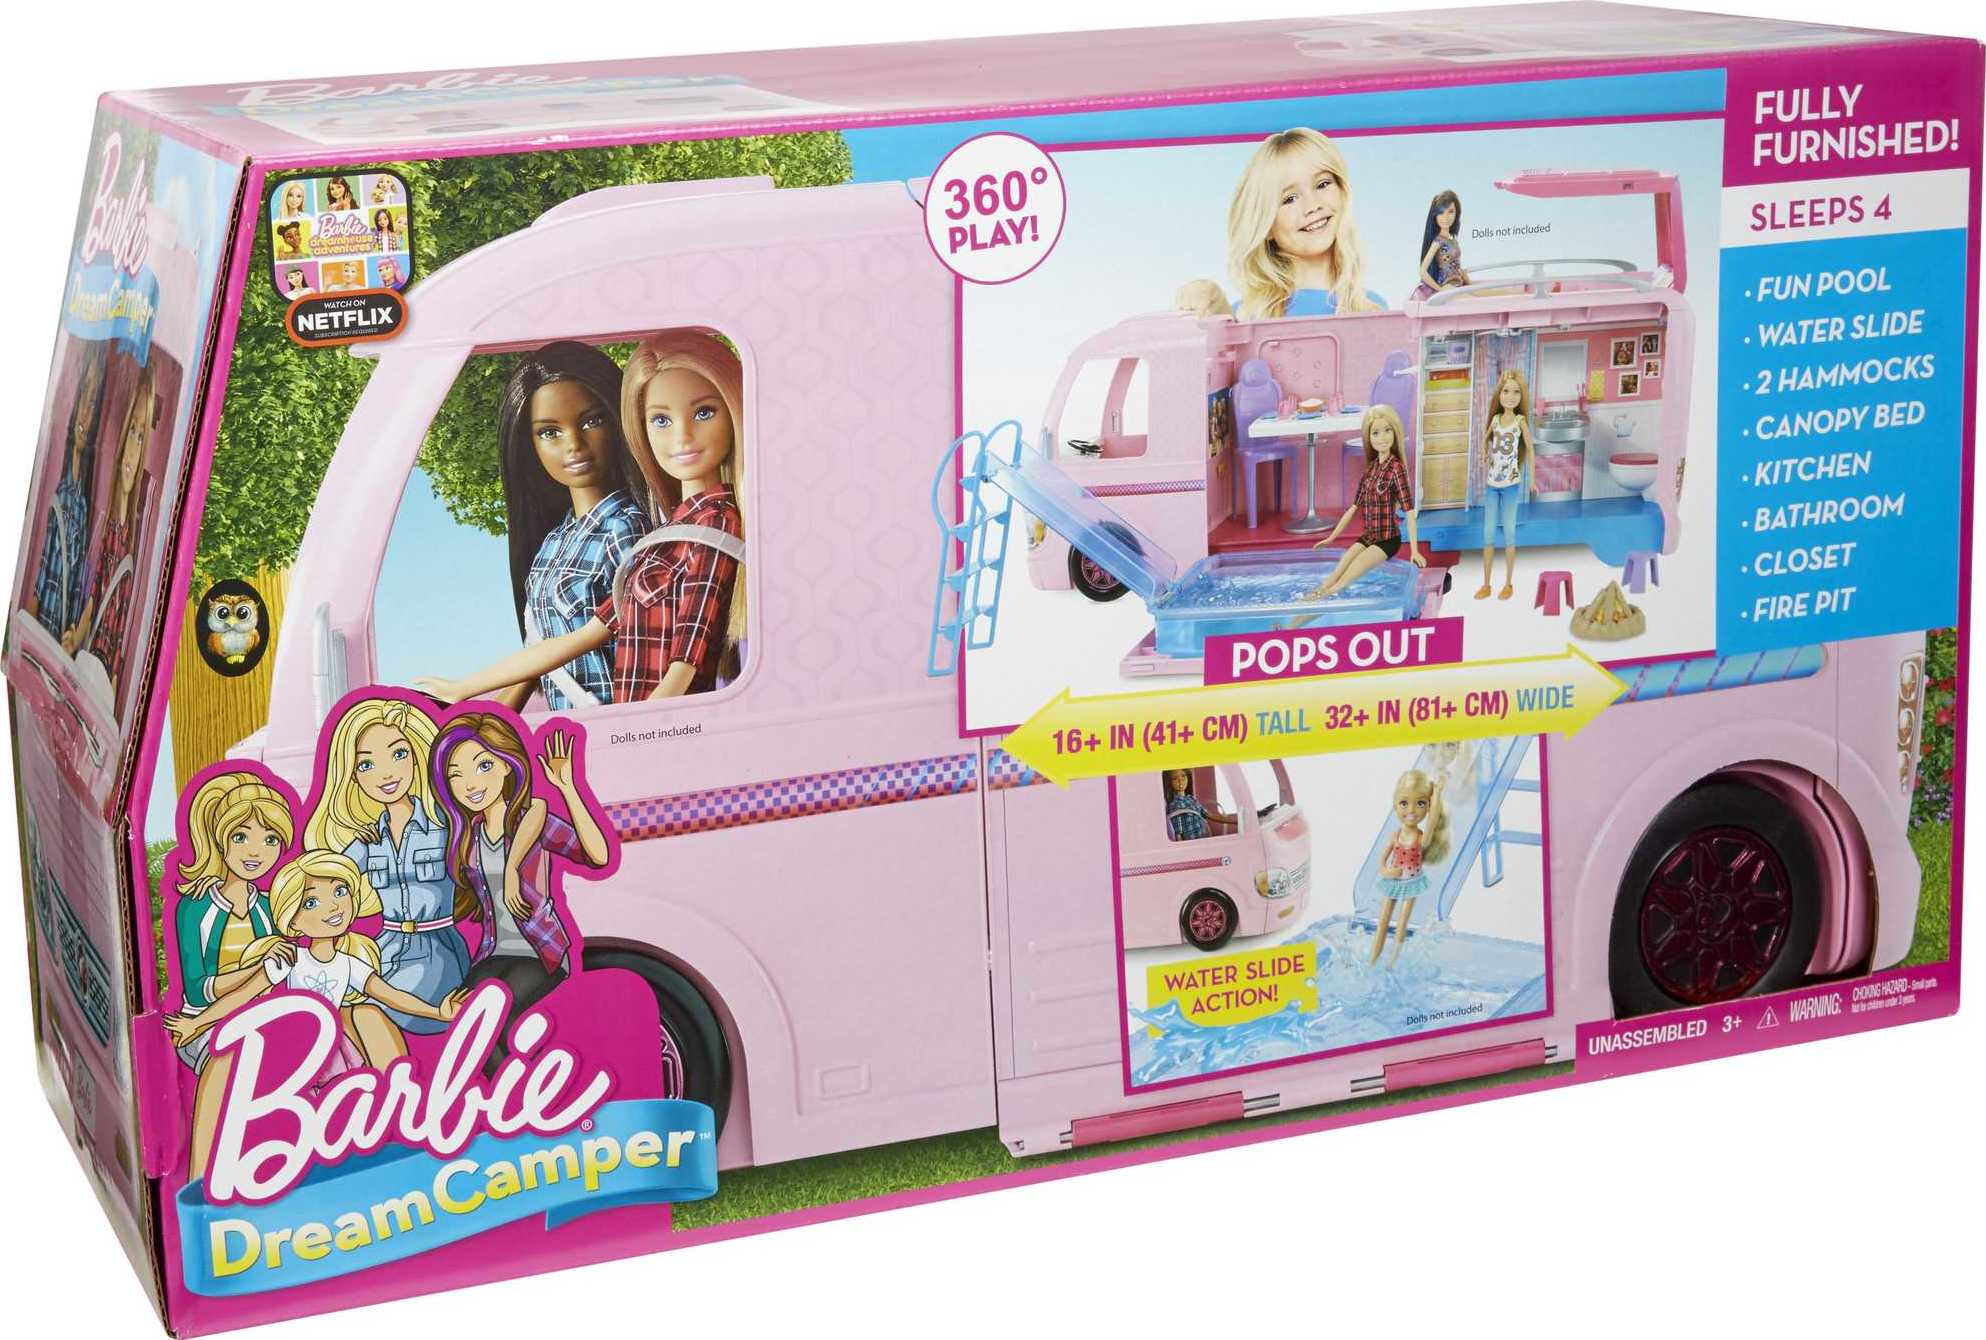 Barbie Camper, Doll Playset with 50 Accessories and Waterslide, Dream Camper - image 7 of 8